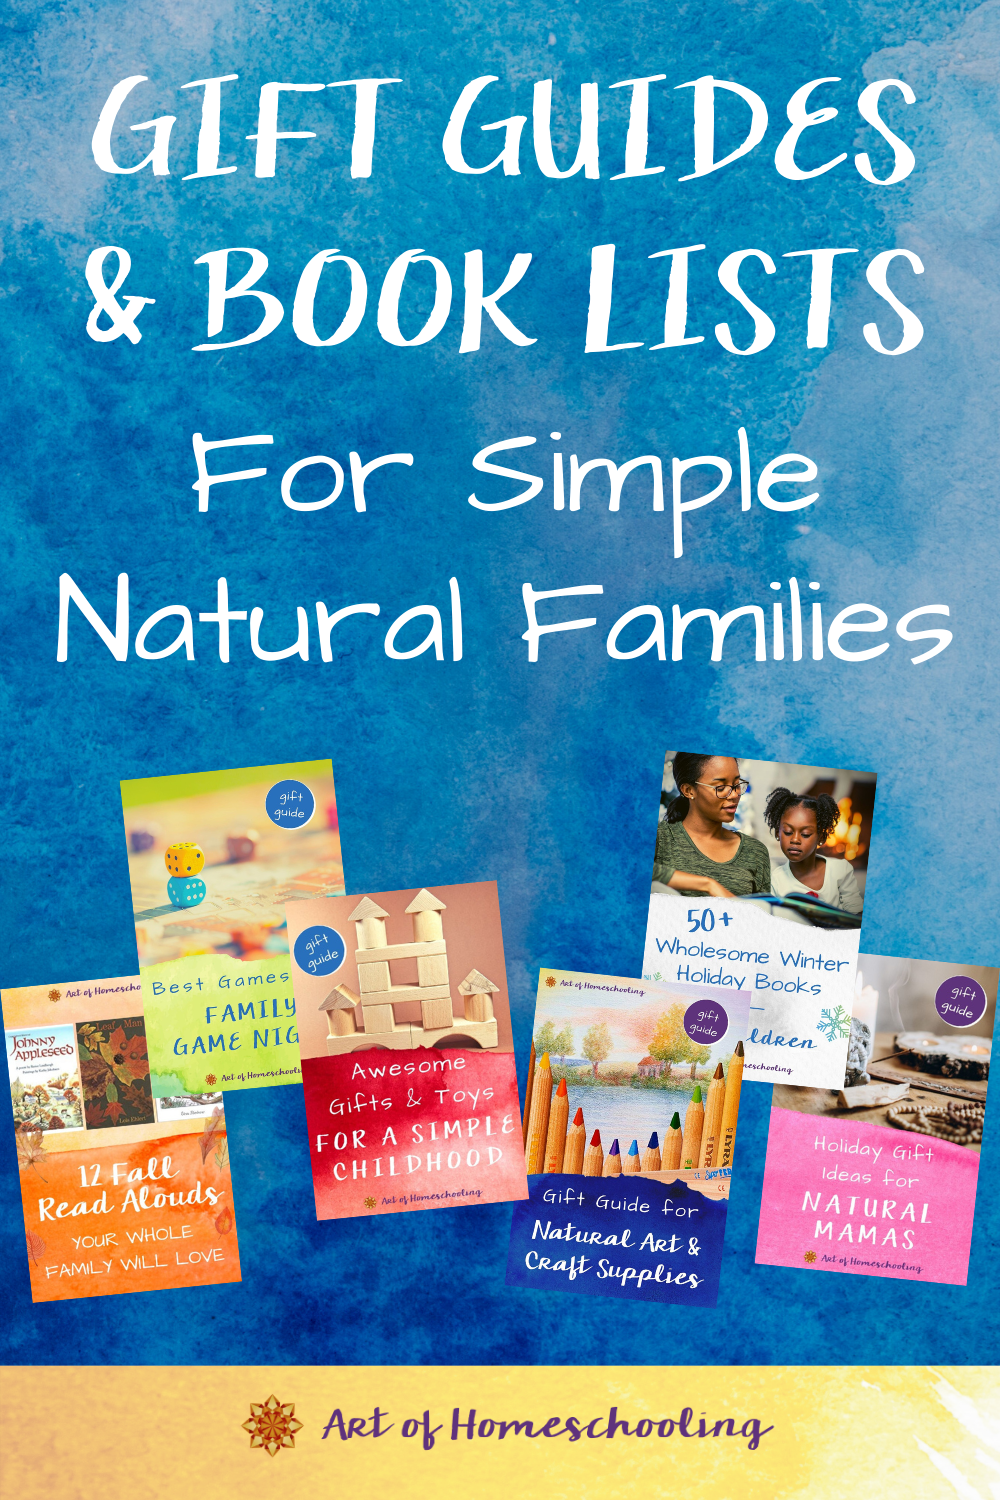 https://artofhomeschooling.com/wp-content/uploads/2020/11/Gift-Guides-Book-Lists-PIN-Final.png